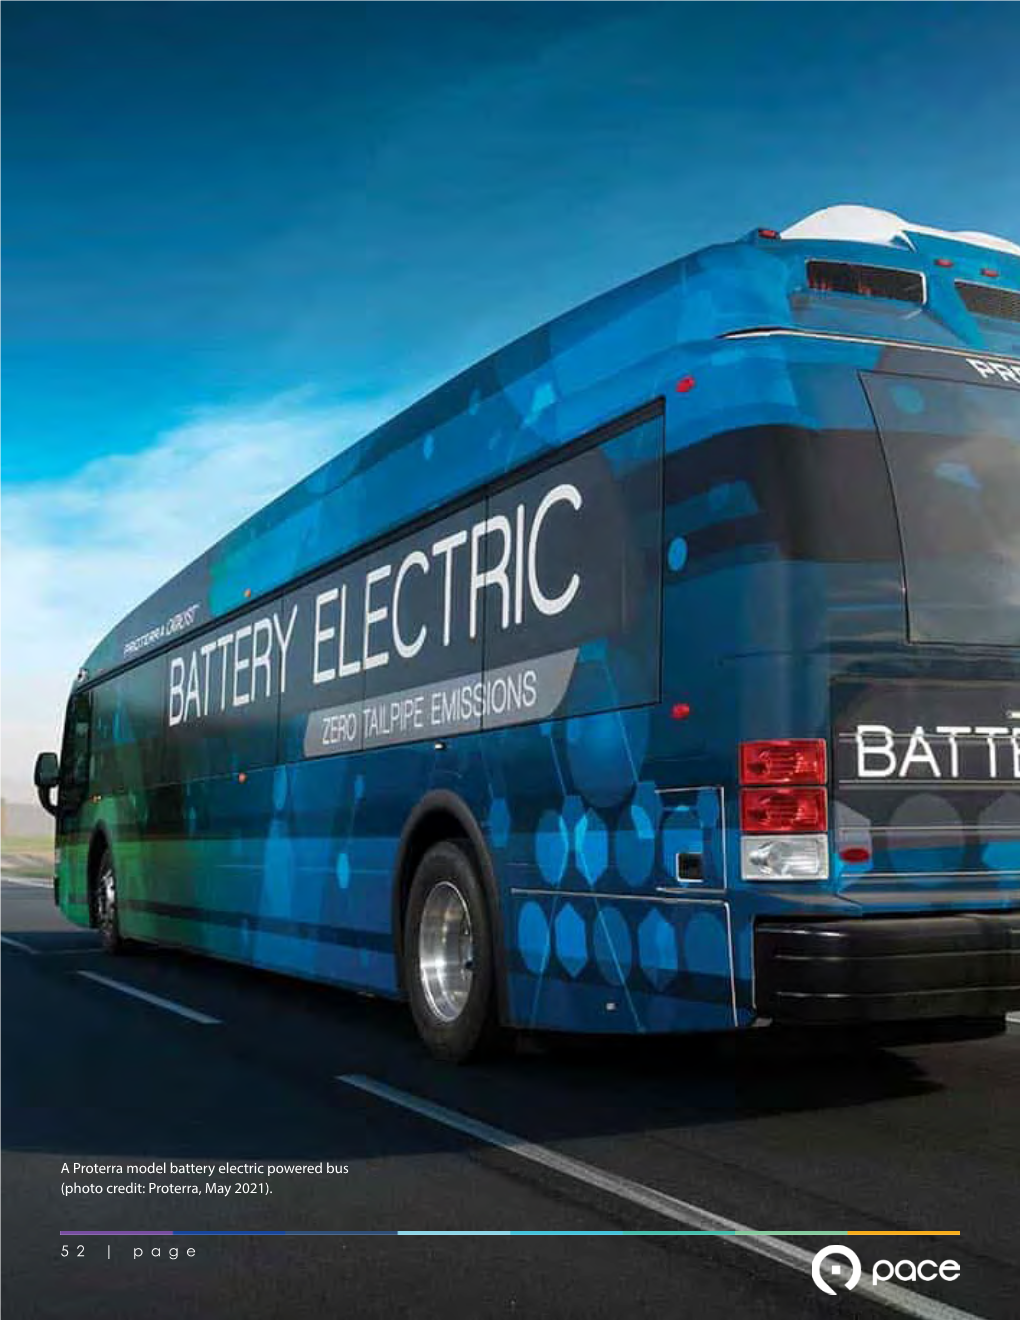 A-1 Electric Bus & Fleet Transition Planning